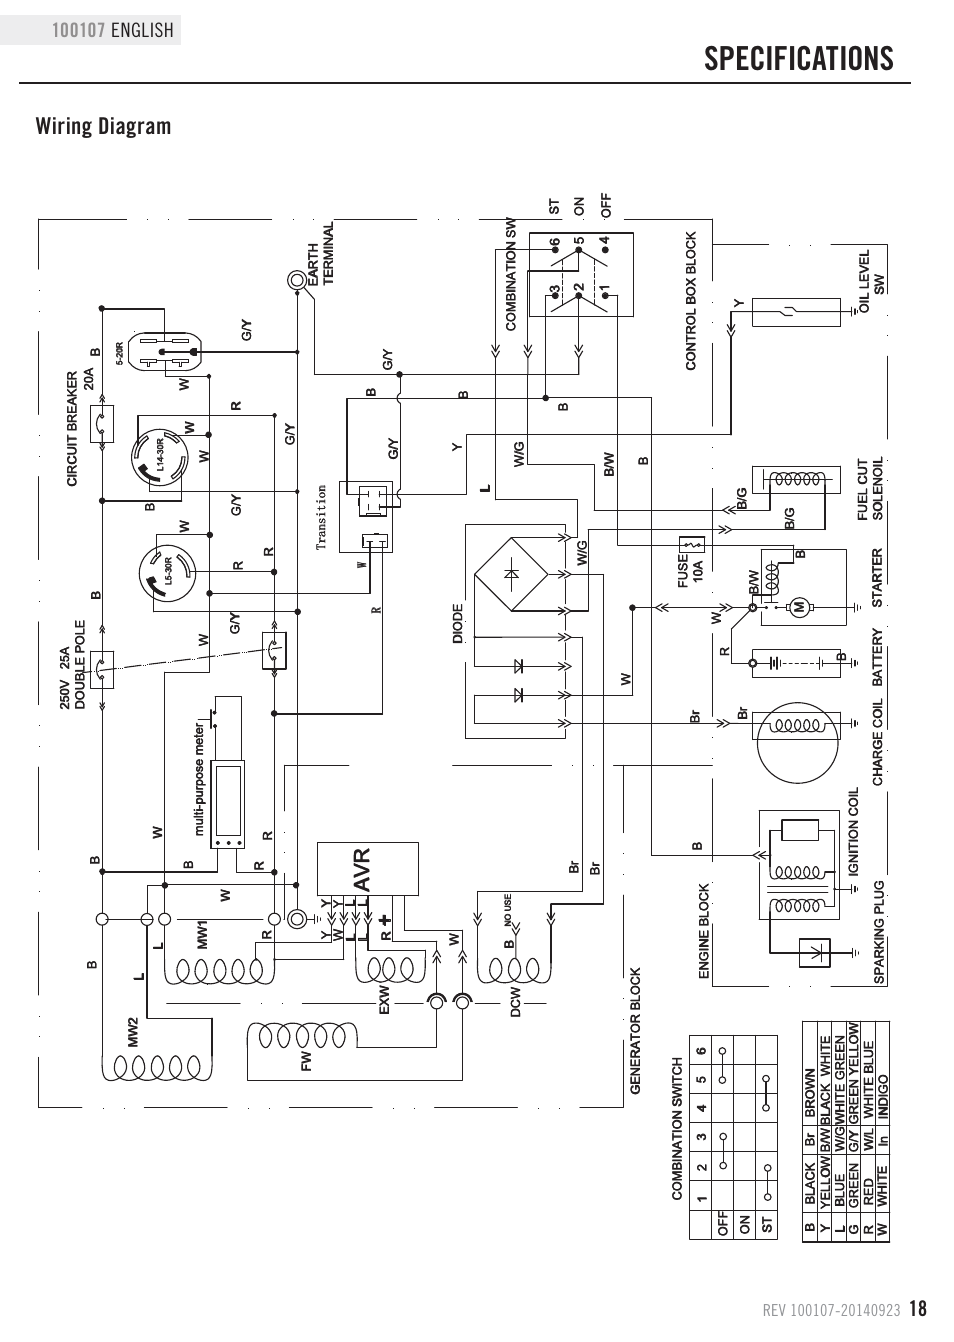 Specifications, Wiring diagram | Champion Power Equipment 100107 User Manual | Page 21 / 30